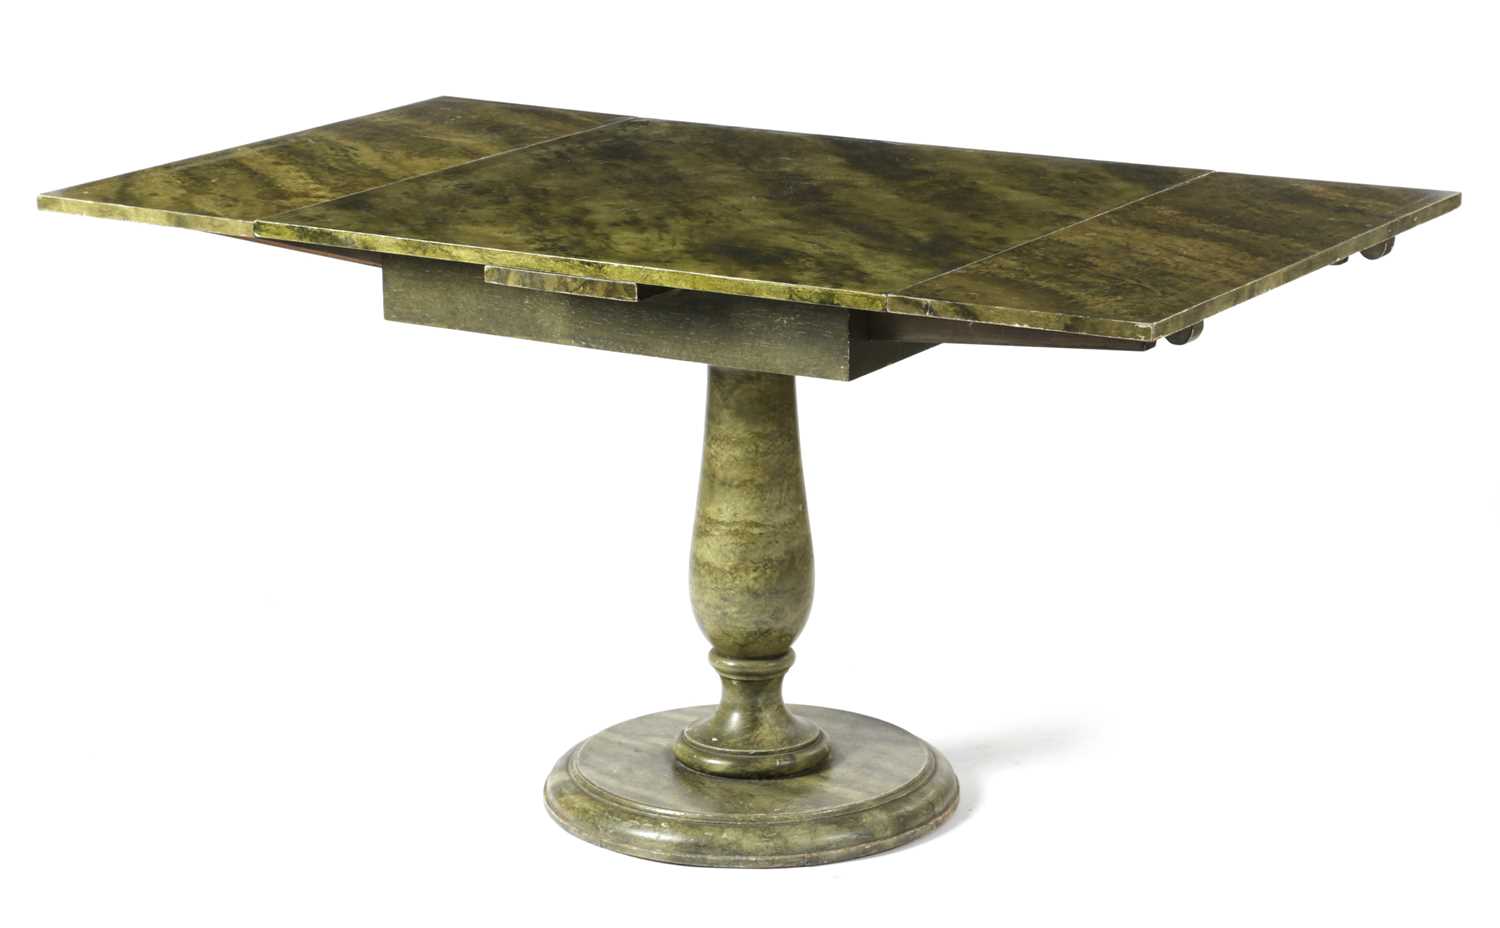 A RARE GREEN PAINTED FAUX MARBLE DRAW-LEAF DINING TABLE ATTRIBUTED TO JOHN FOWLER, C.1950-60 the - Image 2 of 3